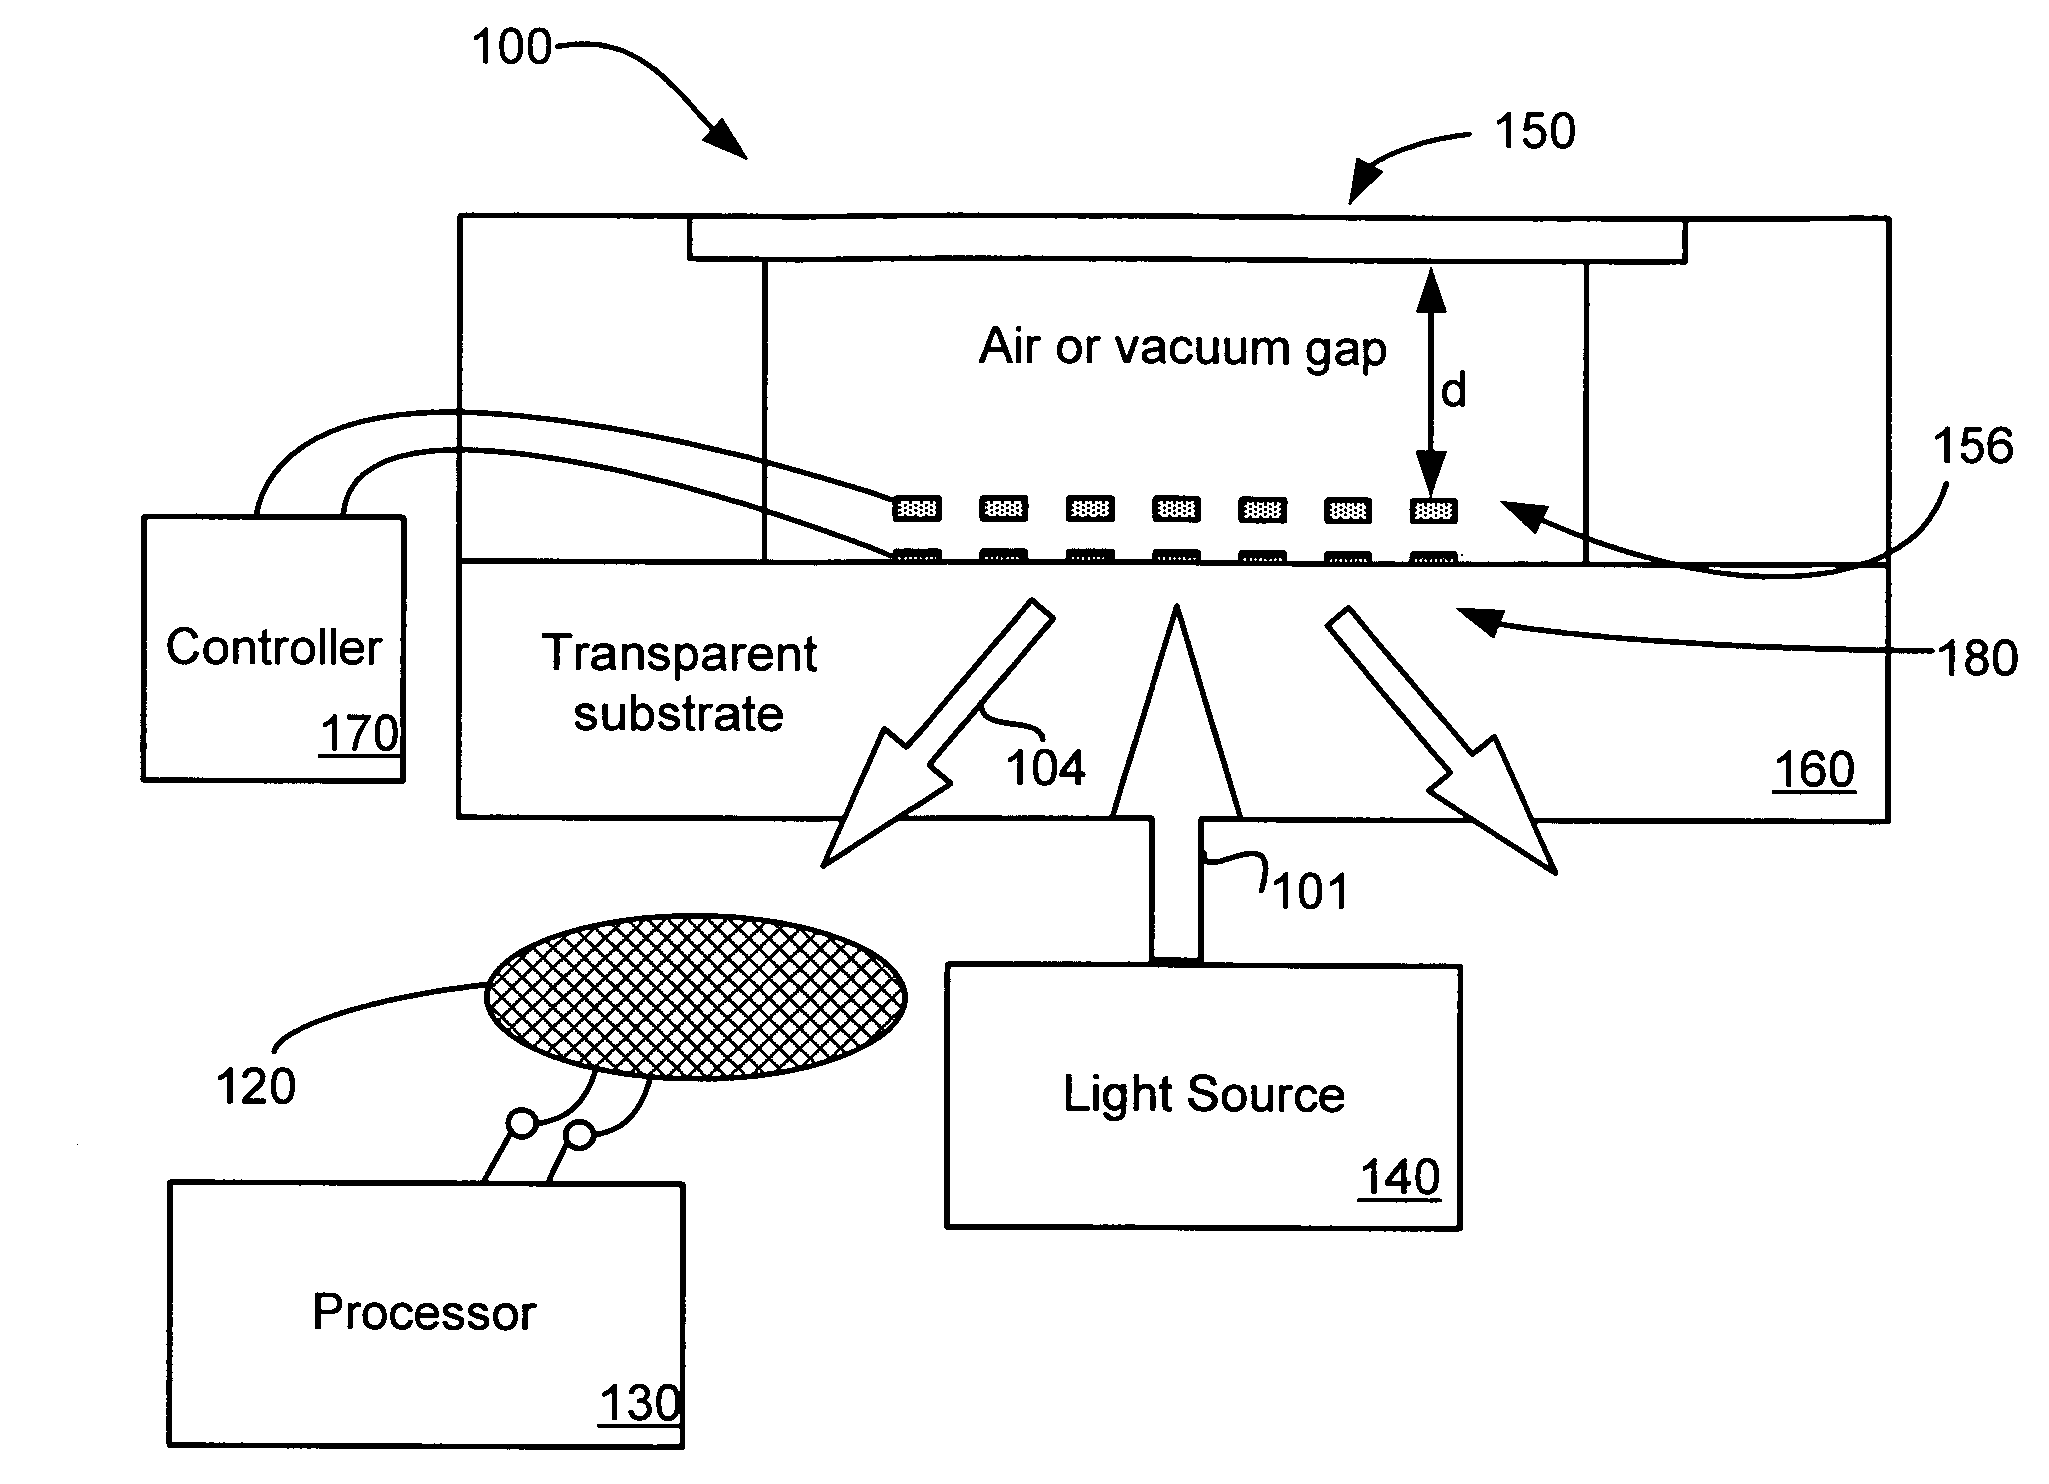 Highly-sensitive displacement-measuring optical device